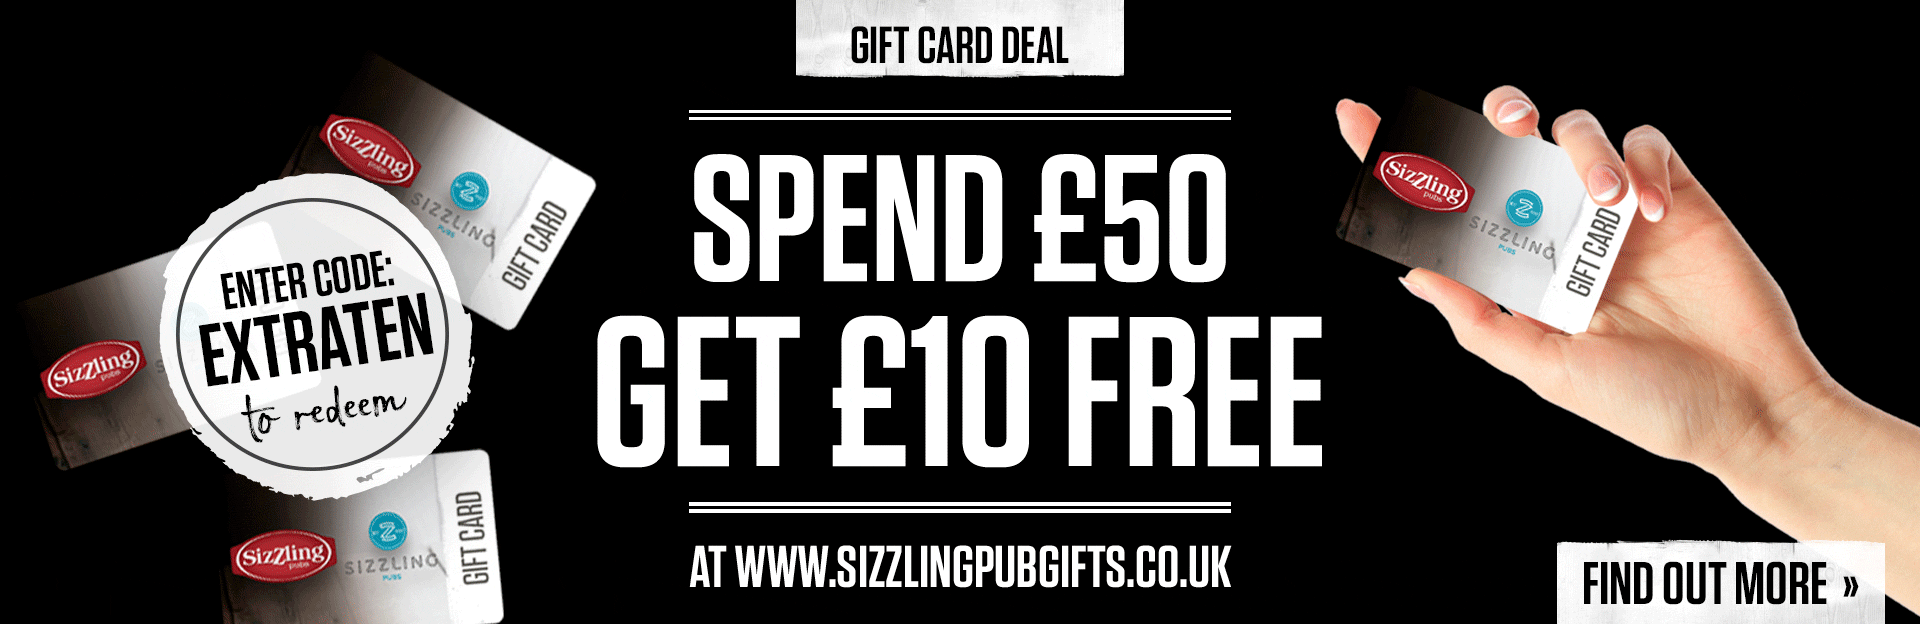 Sizzling Pubs & Grill - Your Friendly Local Pub - What Stores Give Out Gift Cards On Black Friday